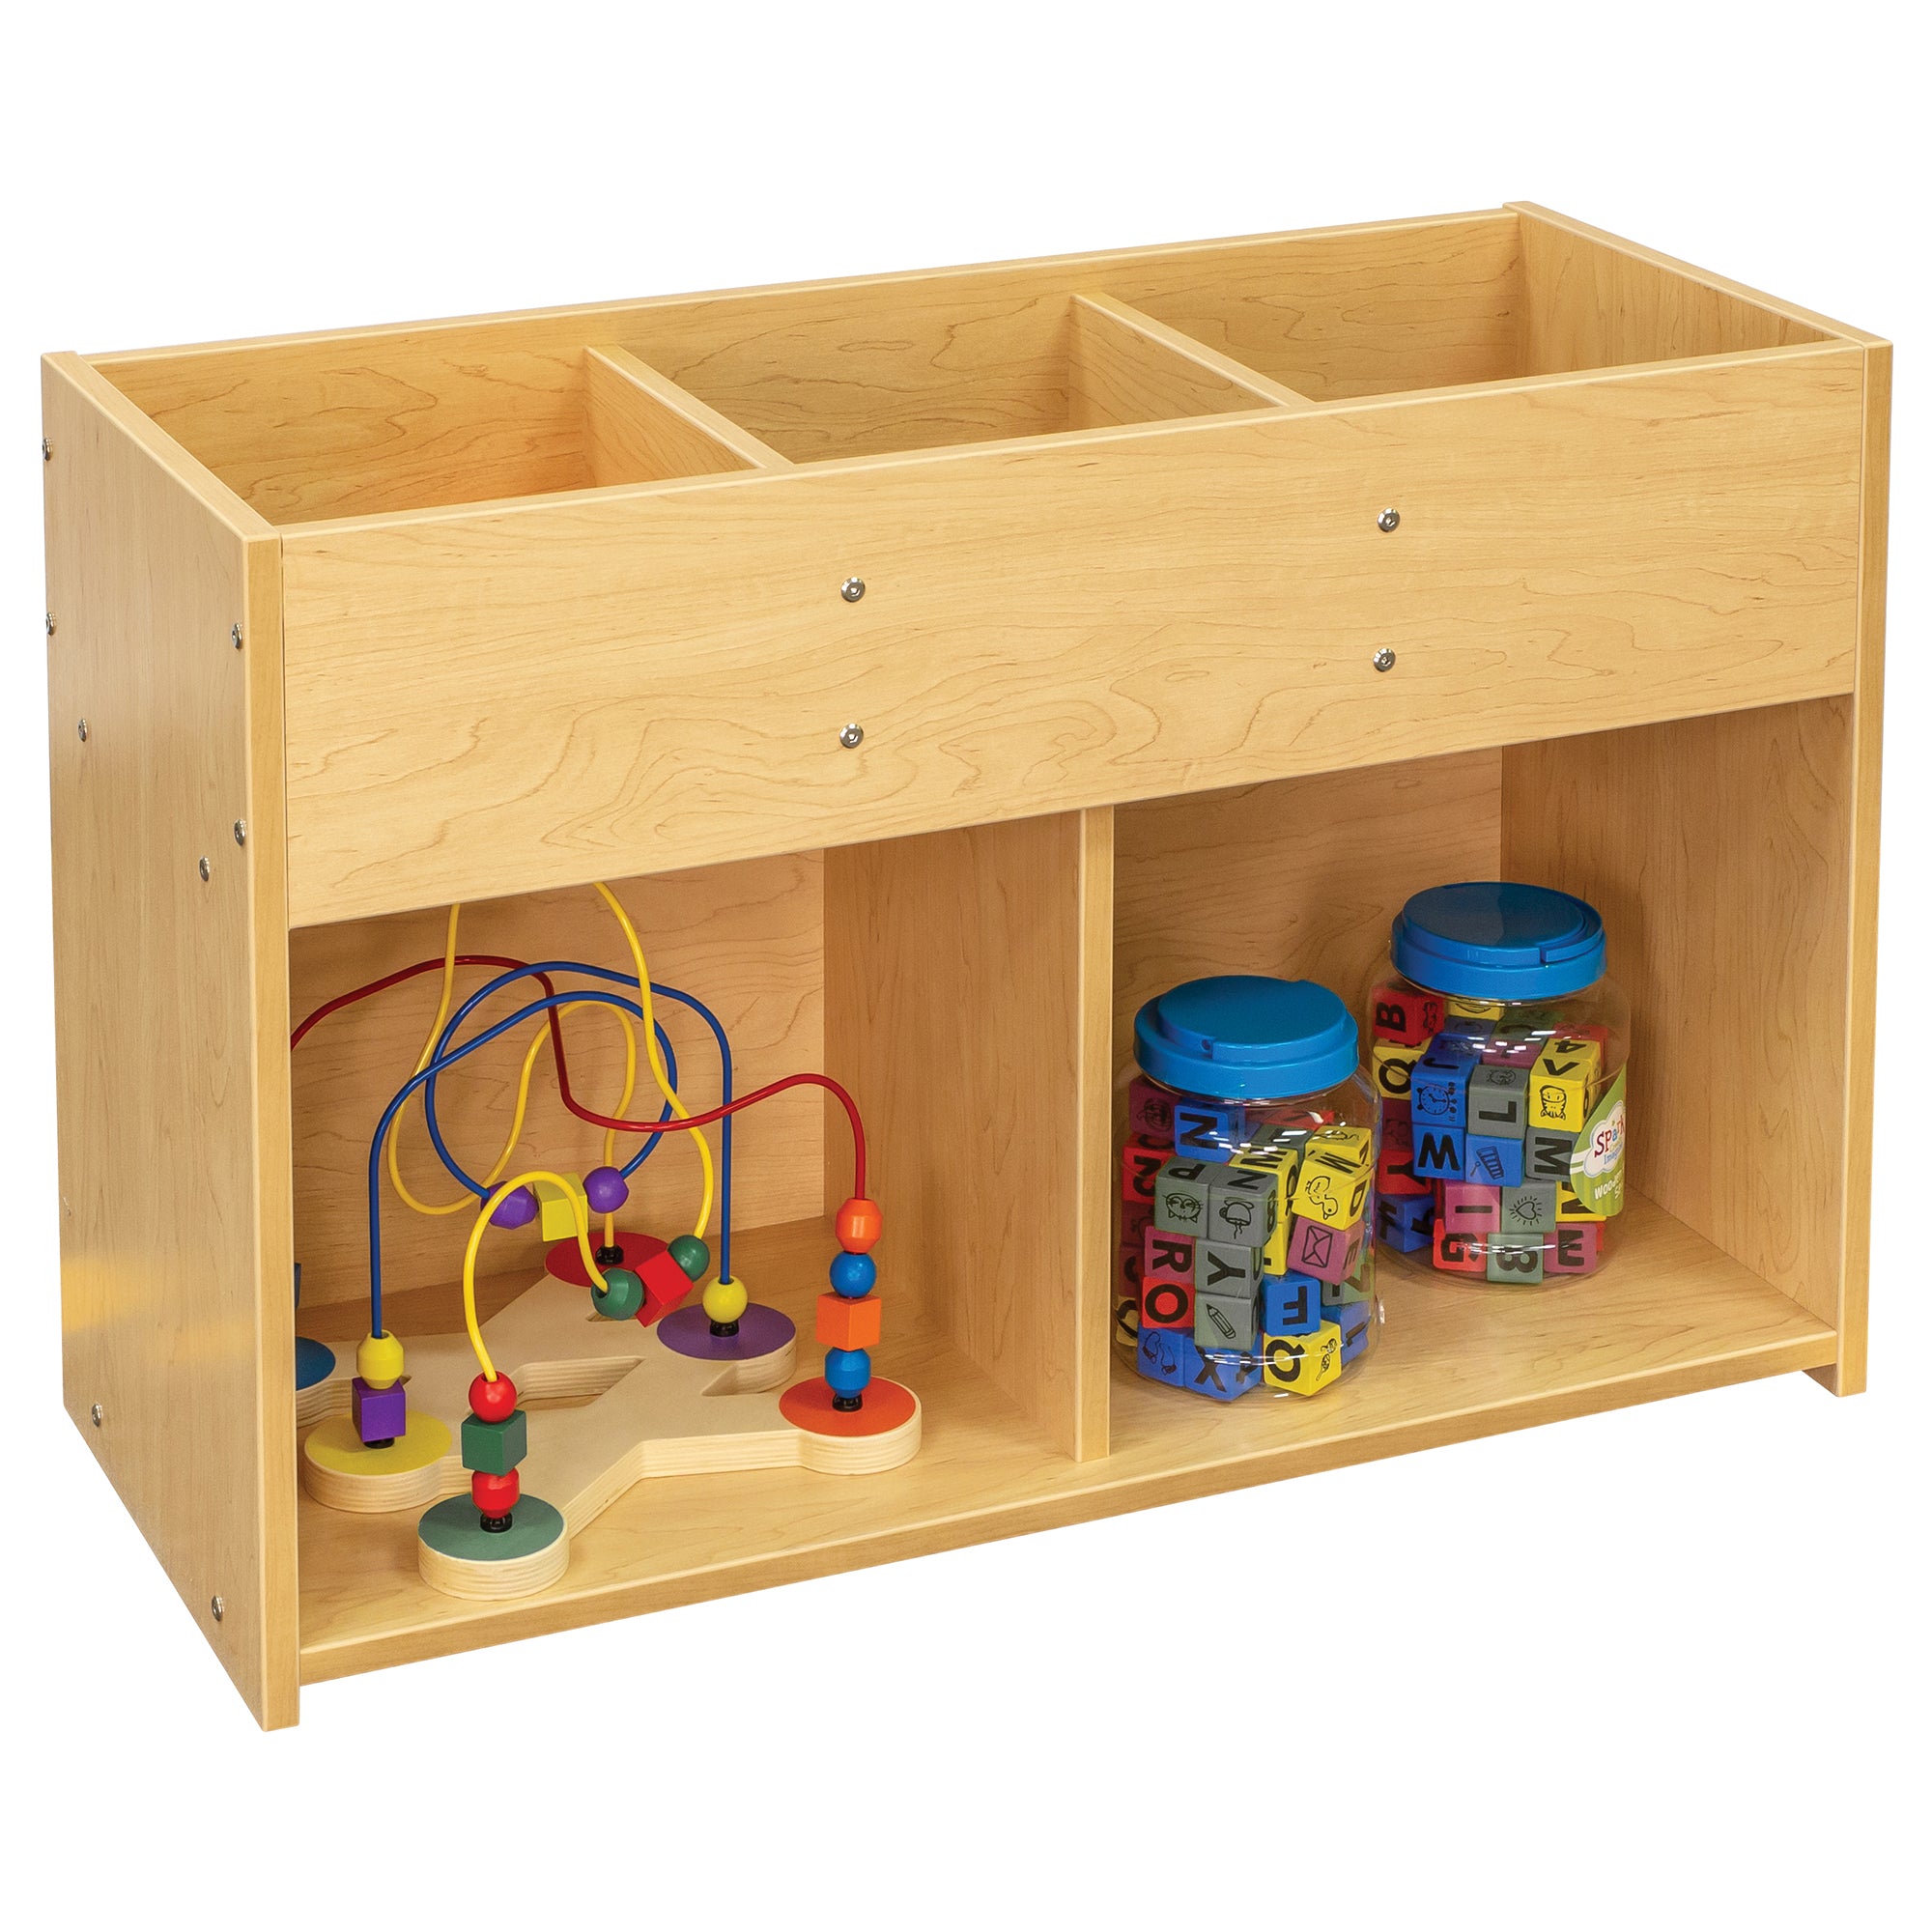 Three Top compartment Book or Toy Storage with Two organizational cubbies.